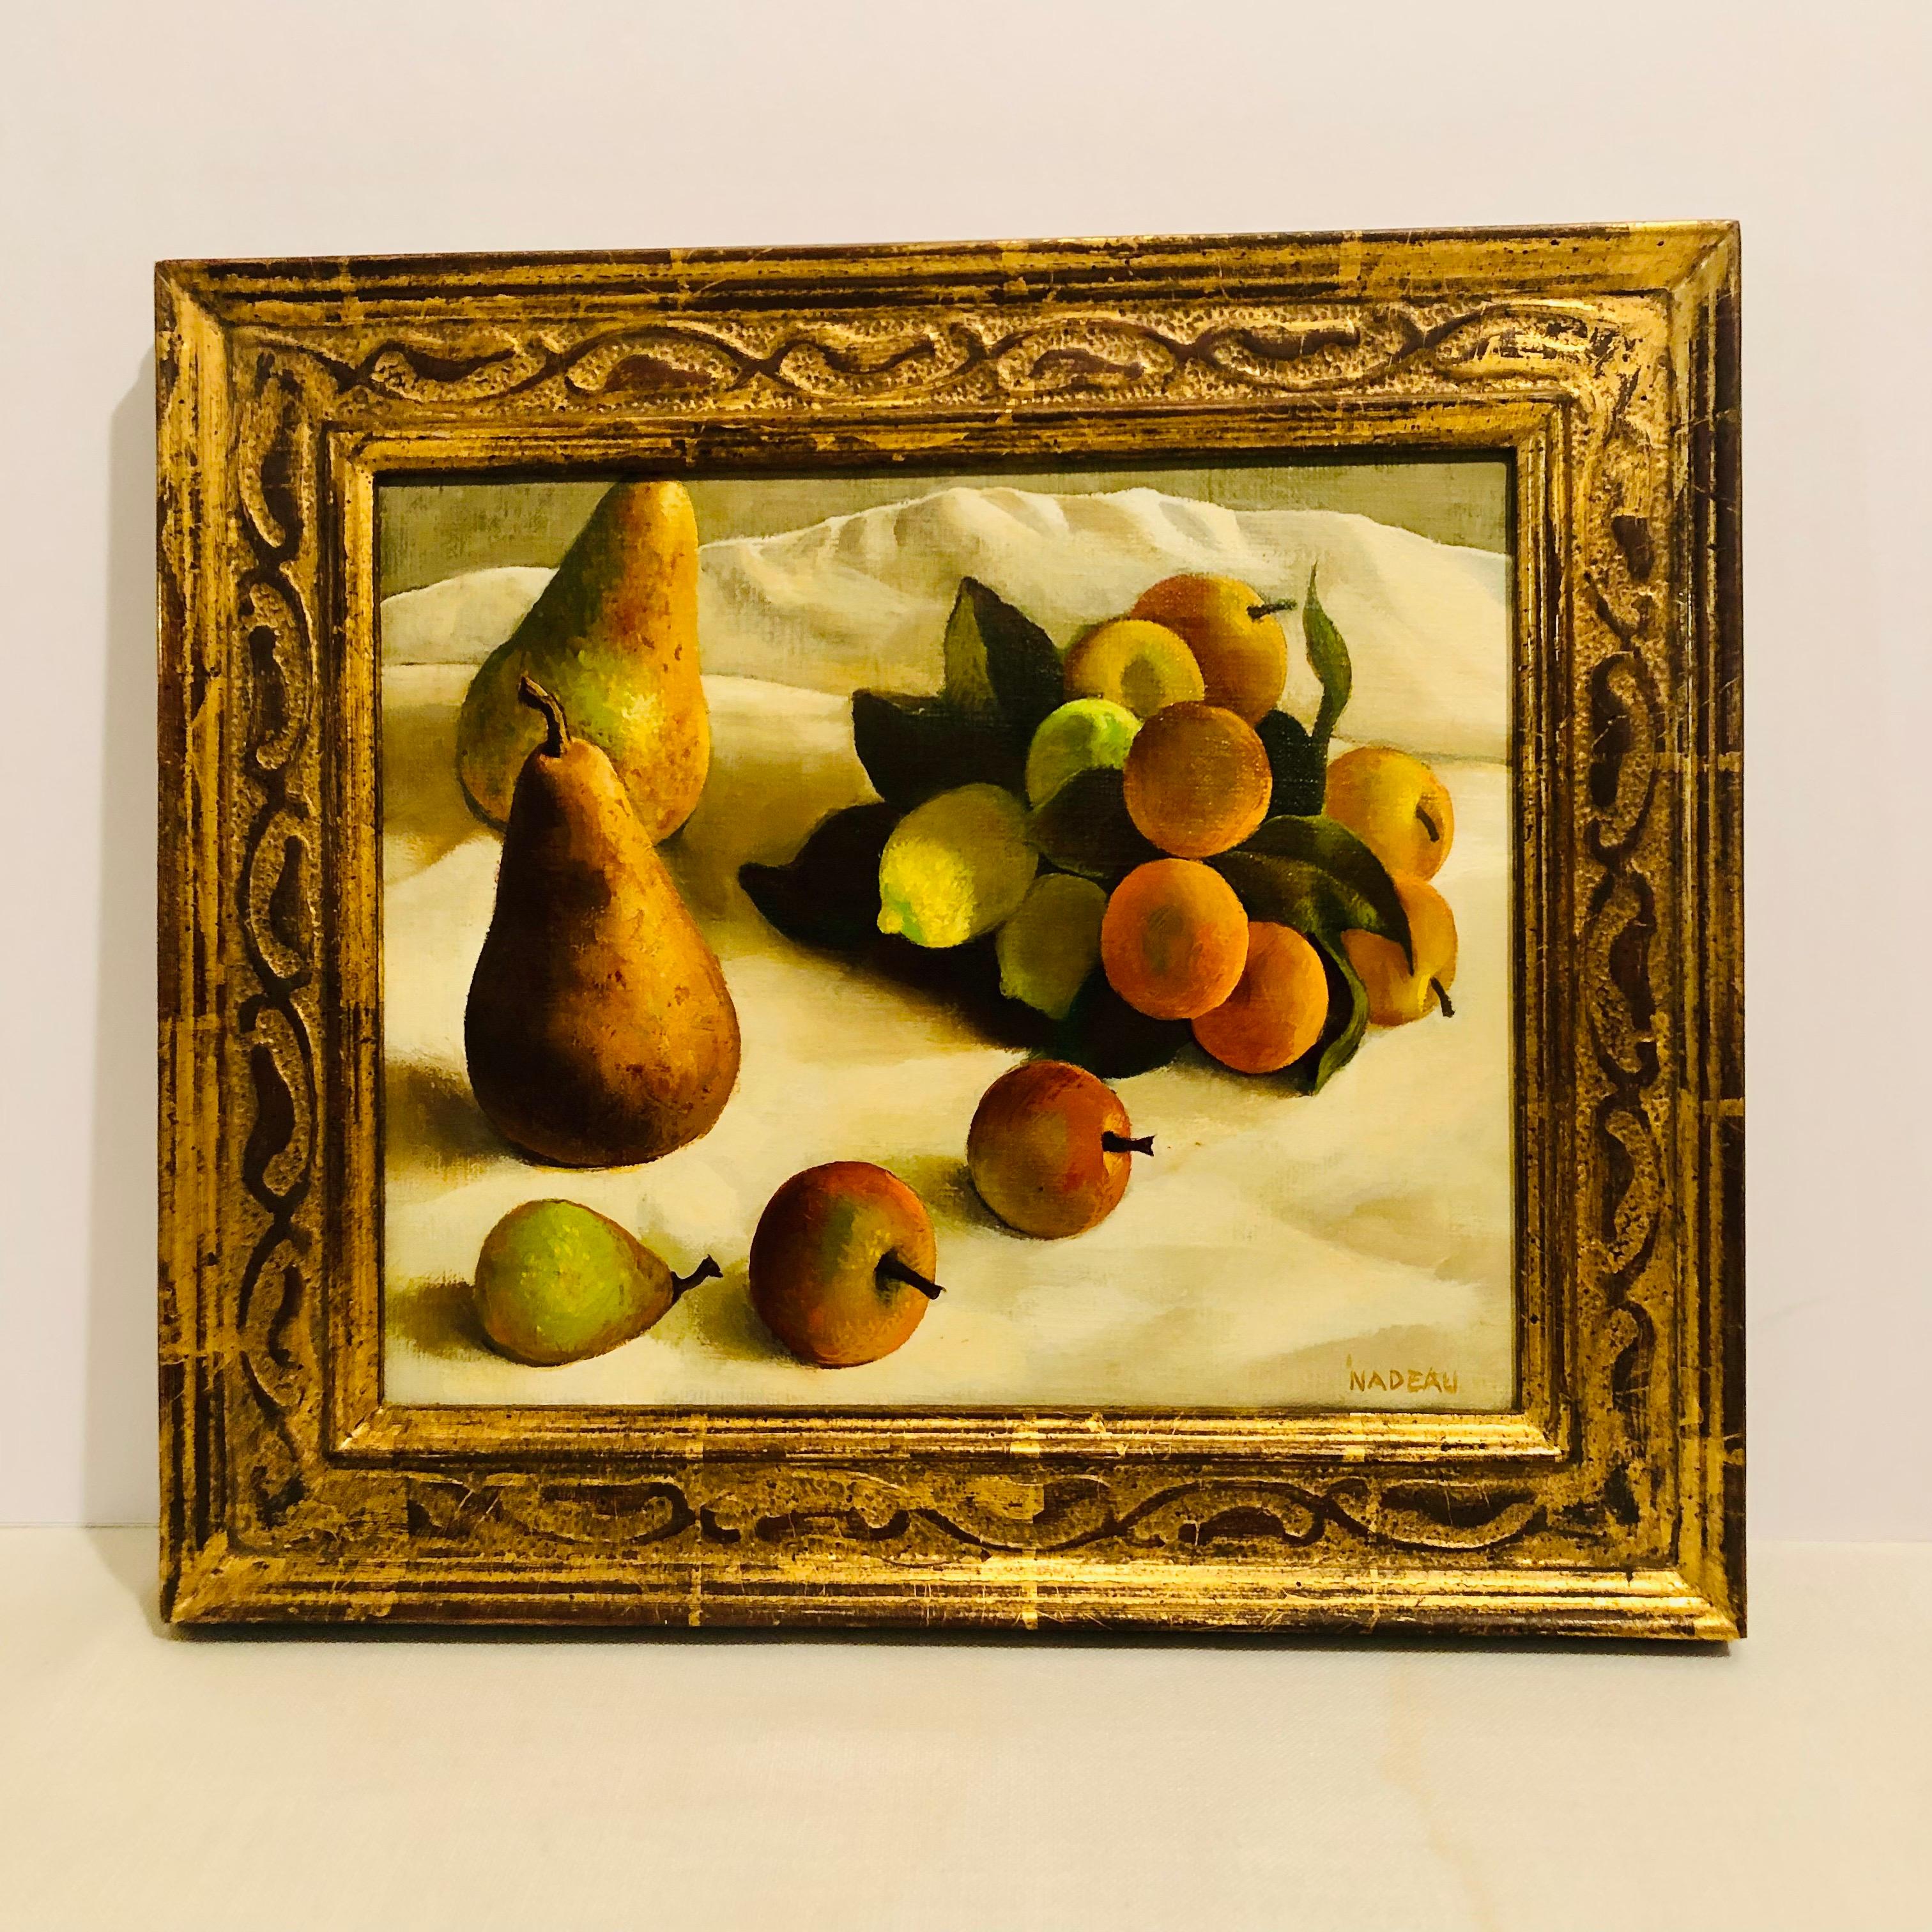 Oil on Canvas Painting of Pears and Other Fruits in a Gold Frame Signed Nadeau 4